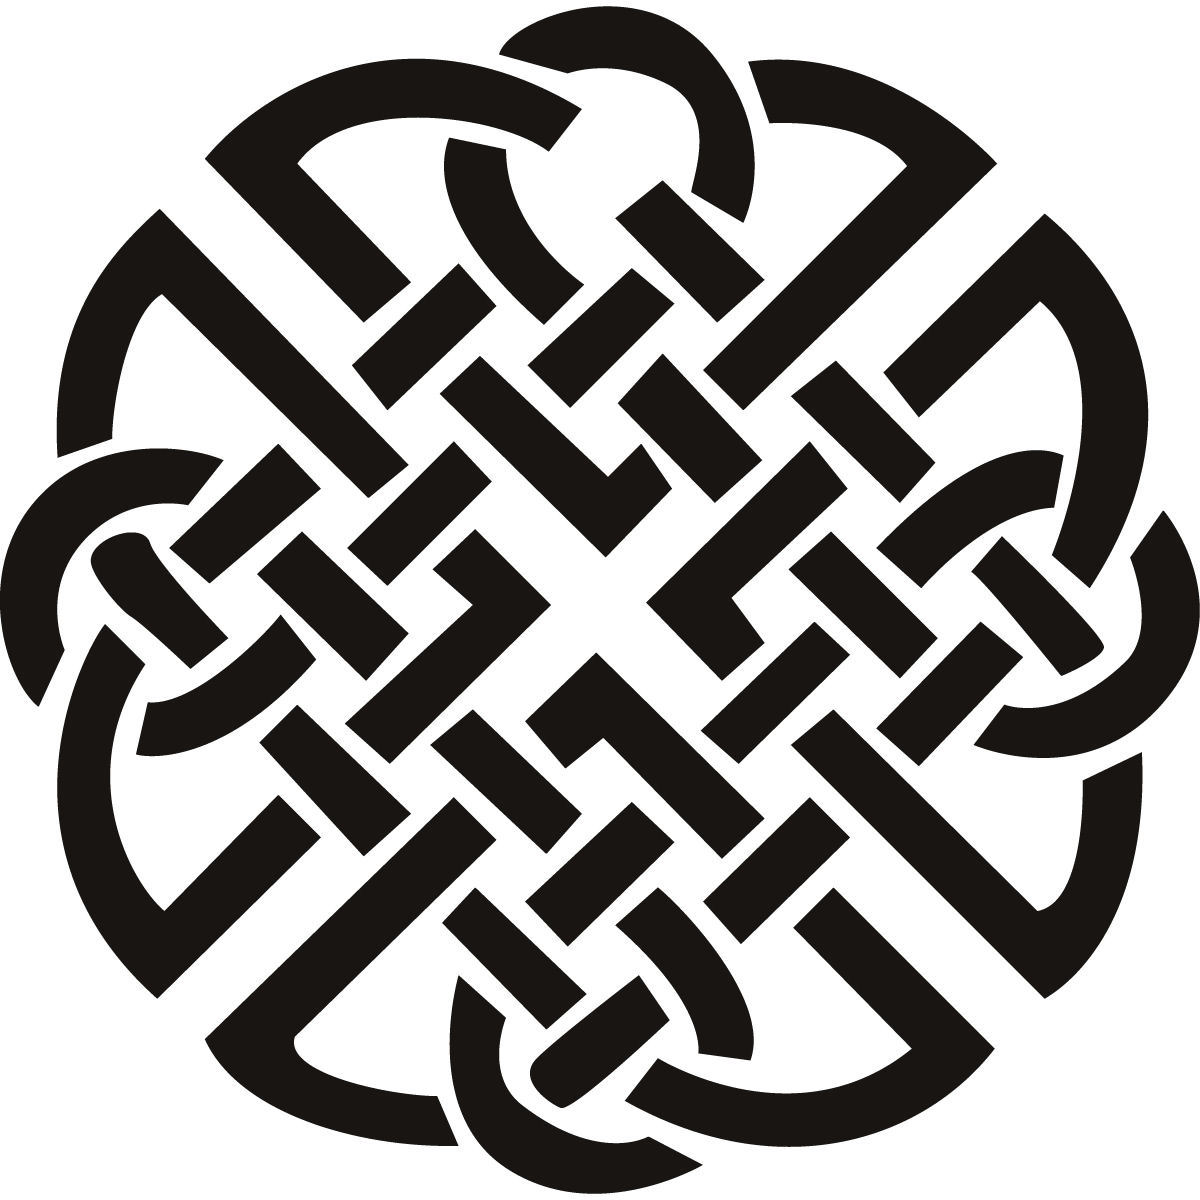 I went looking for celtic knot designs to decorate a nordic build 